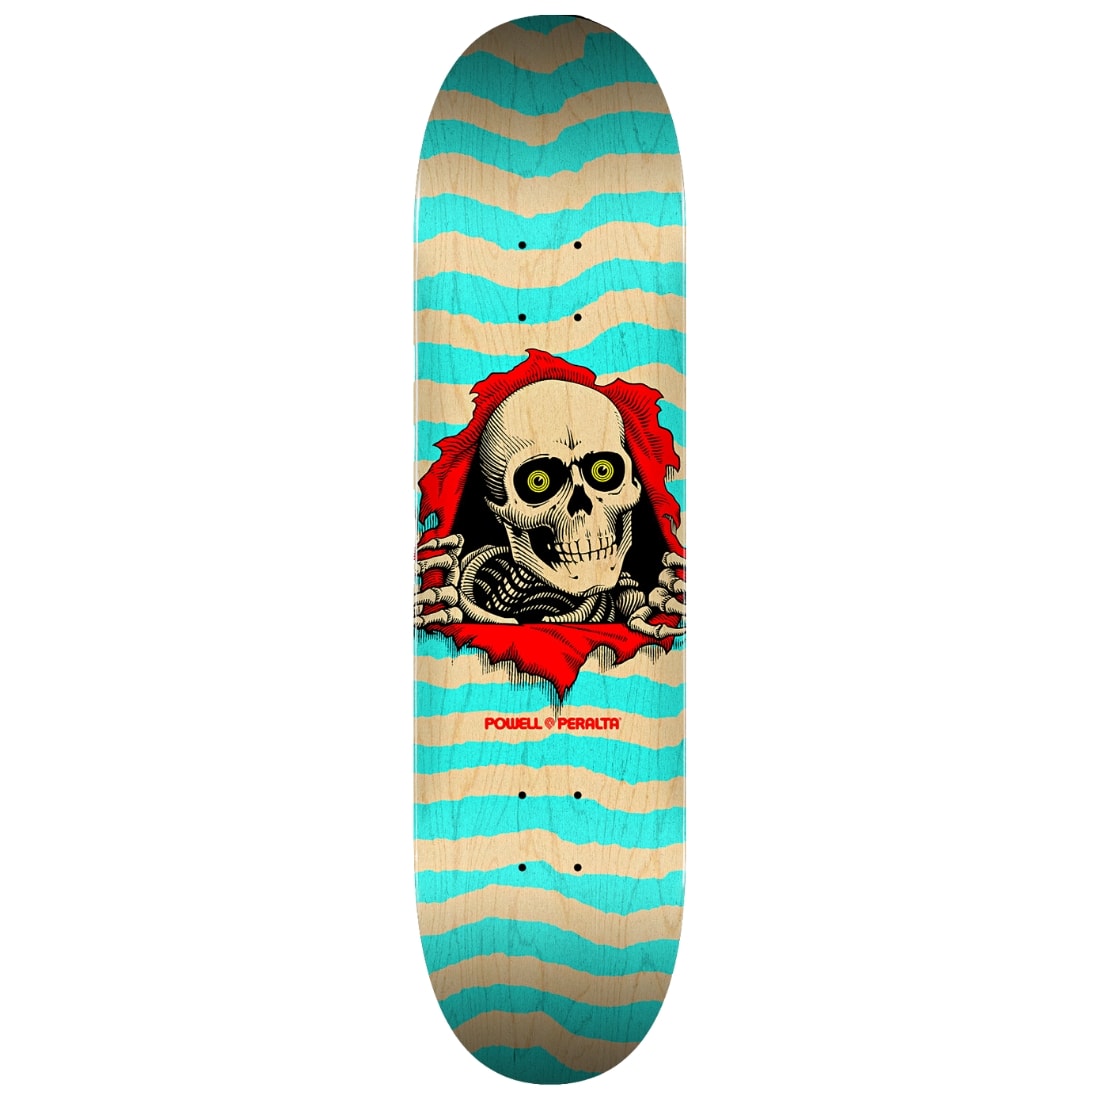 Powell Peralta 8.0" Ripper Shape 242 Skate Deck - Natural Turquoise